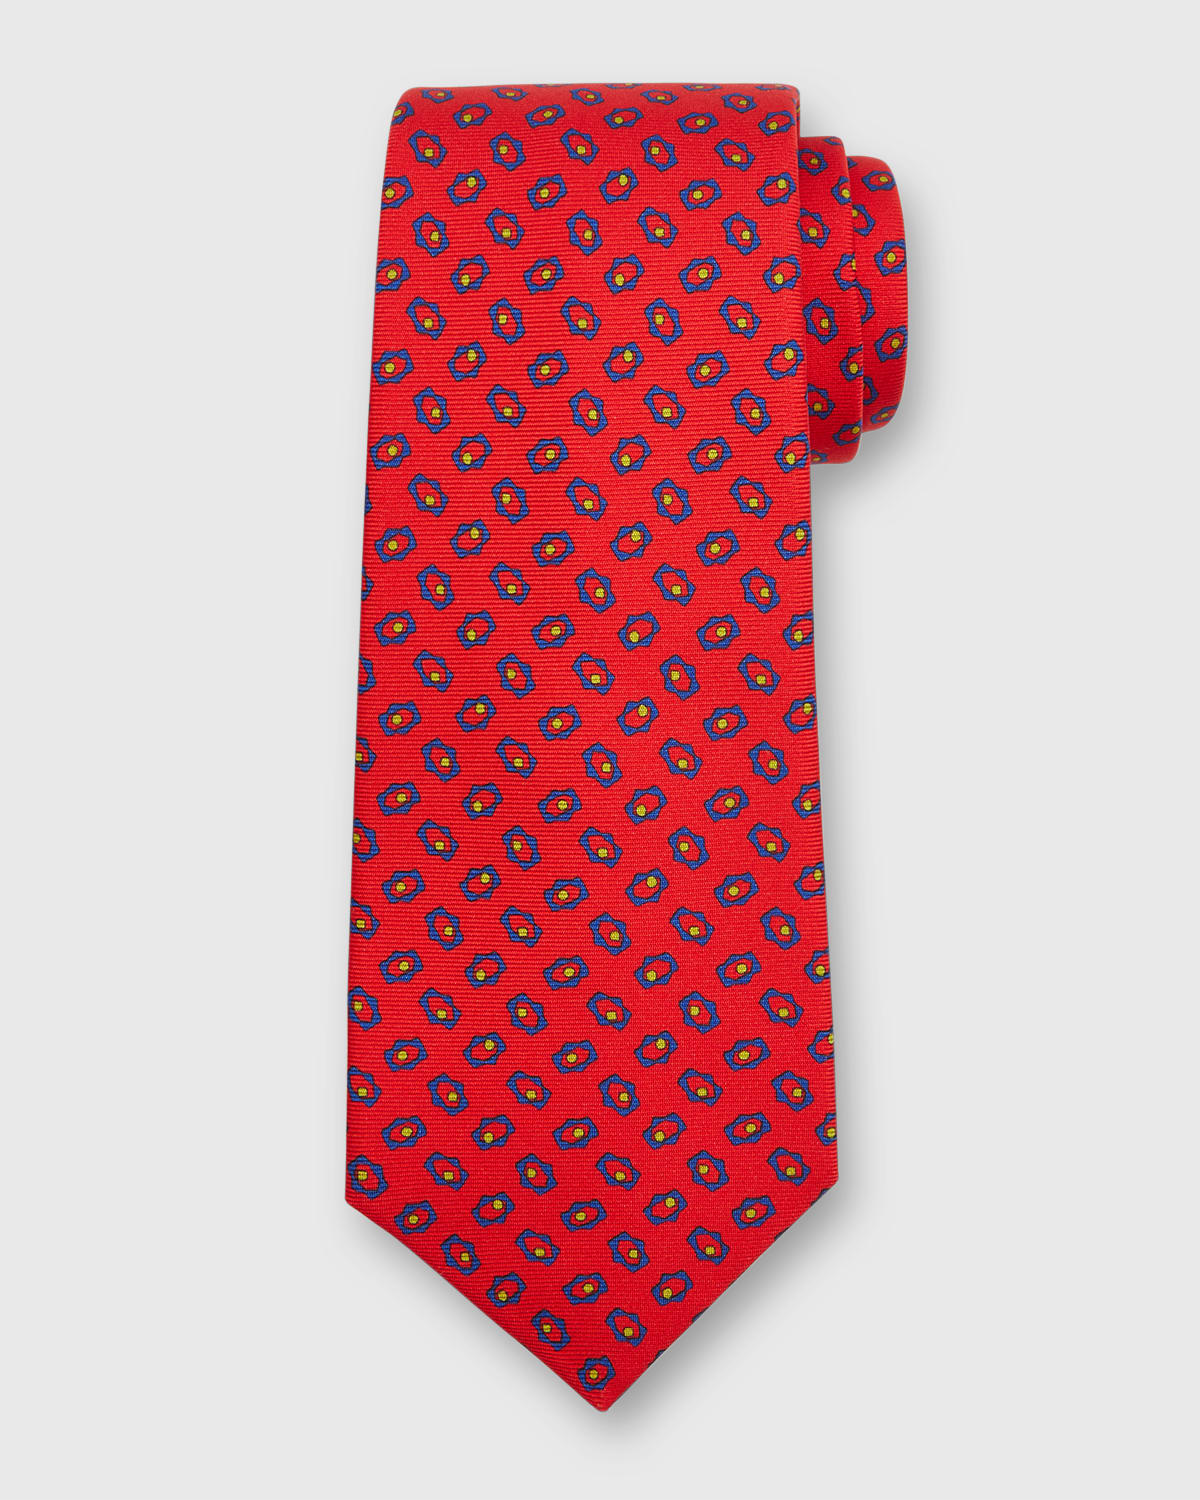 Dark red tie with rectangles patterns